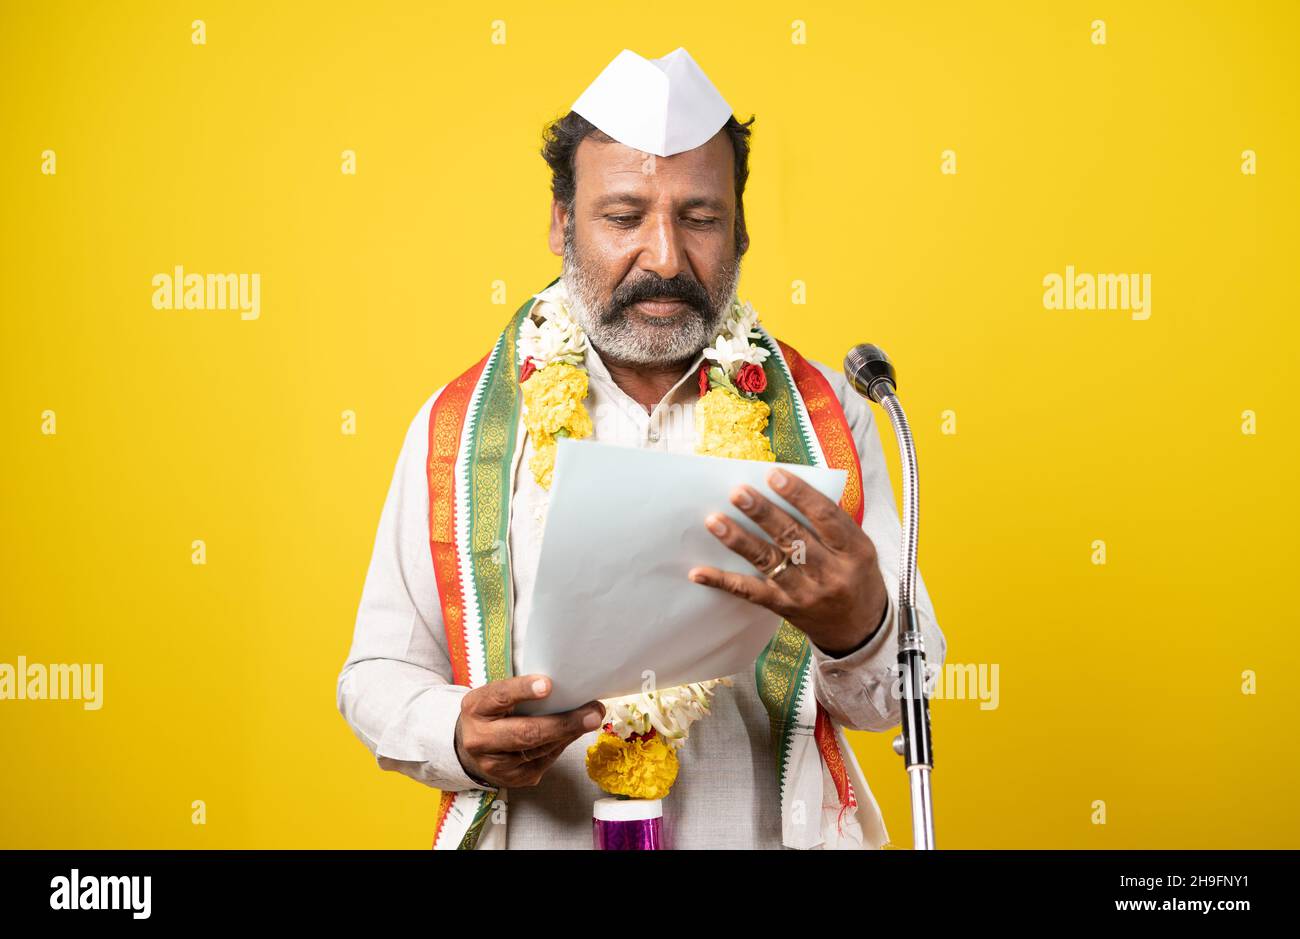 Politician seriously making oath ceremony with garland and white cap by holding papers in front of microphone on yellow background - concept of Stock Photo